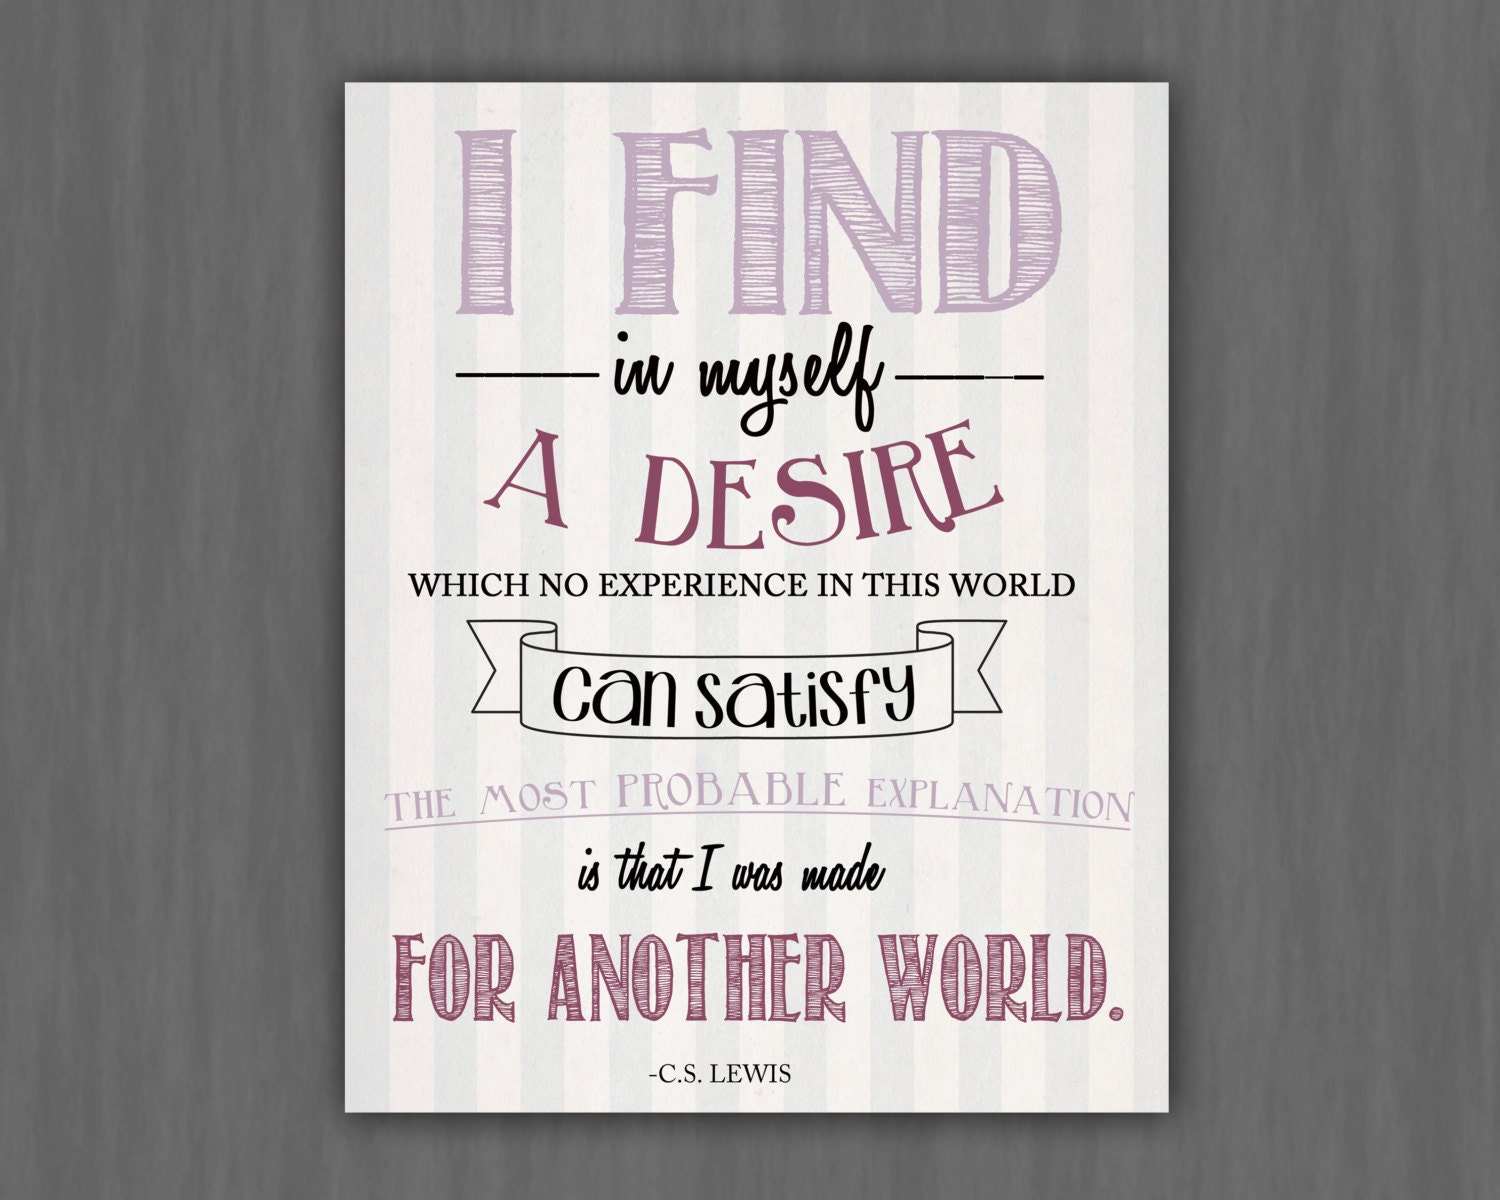 C.S. Lewis quote 8x10 print - OhHappinessCards